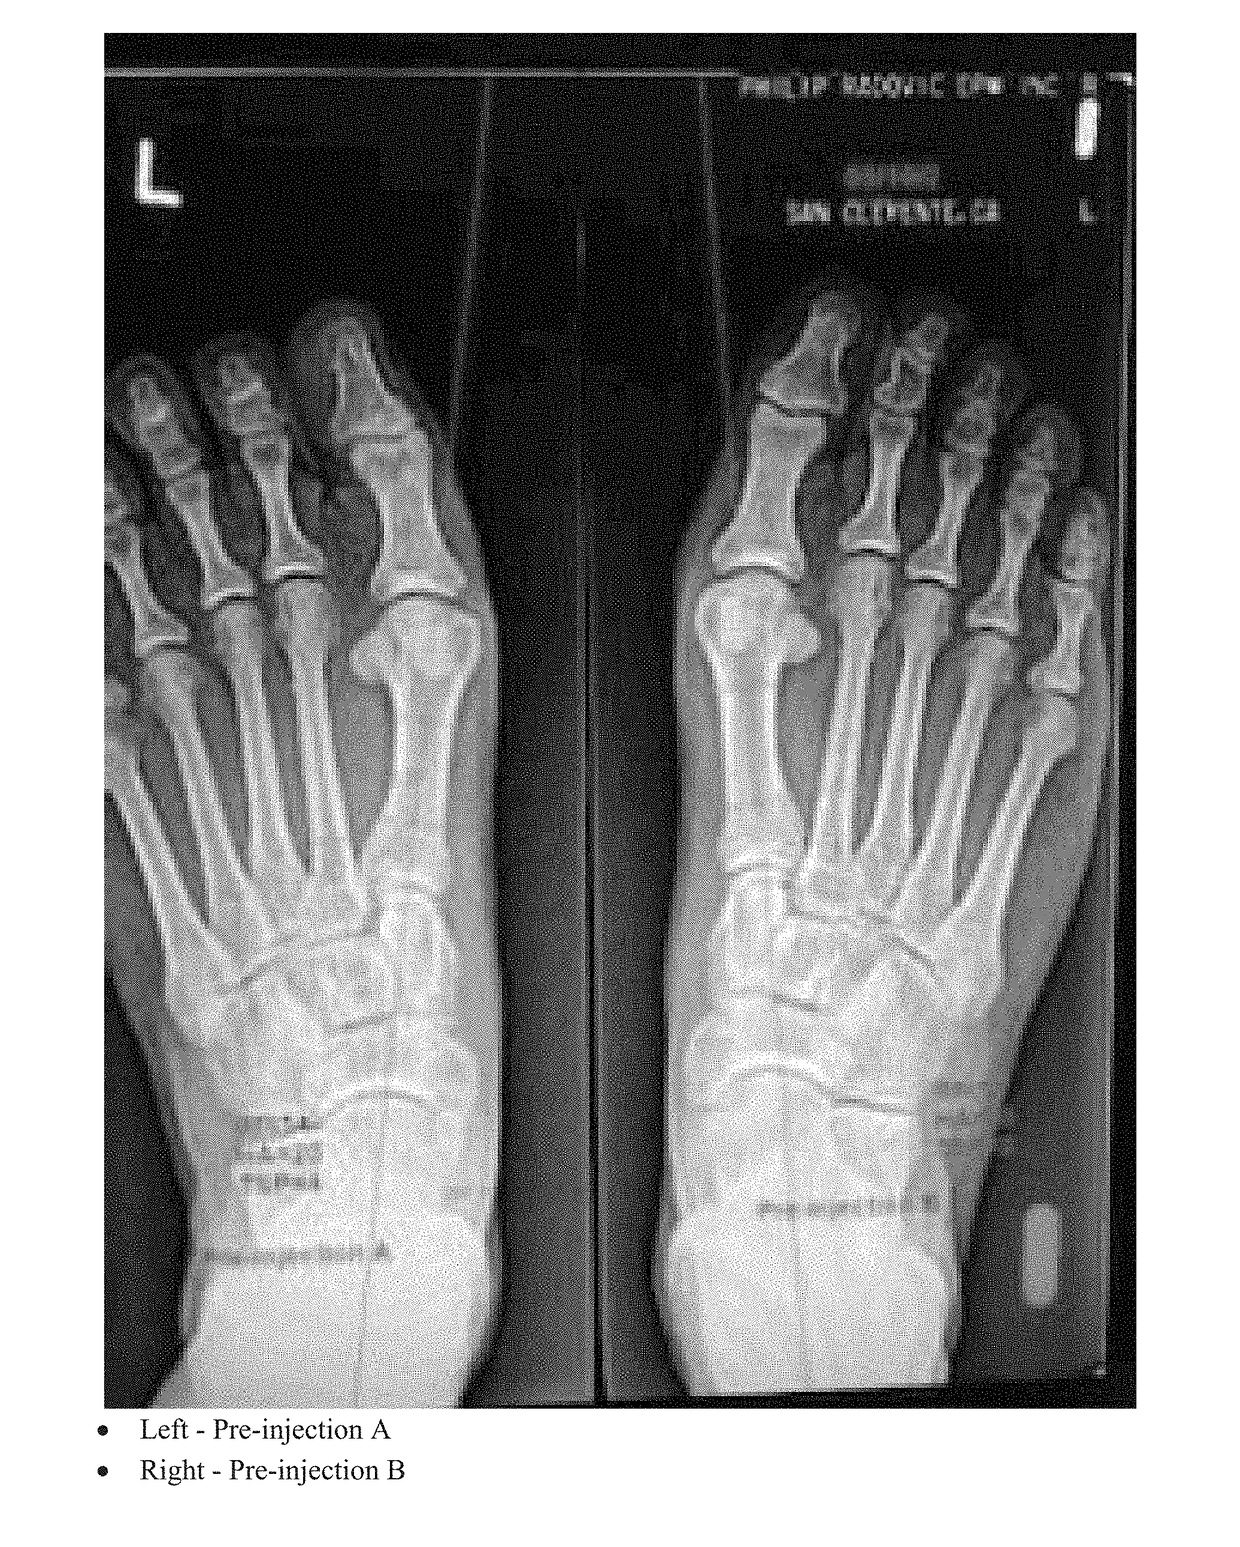 Methods of treating abnormalities of the first metatarsophalangeal joint of the foot